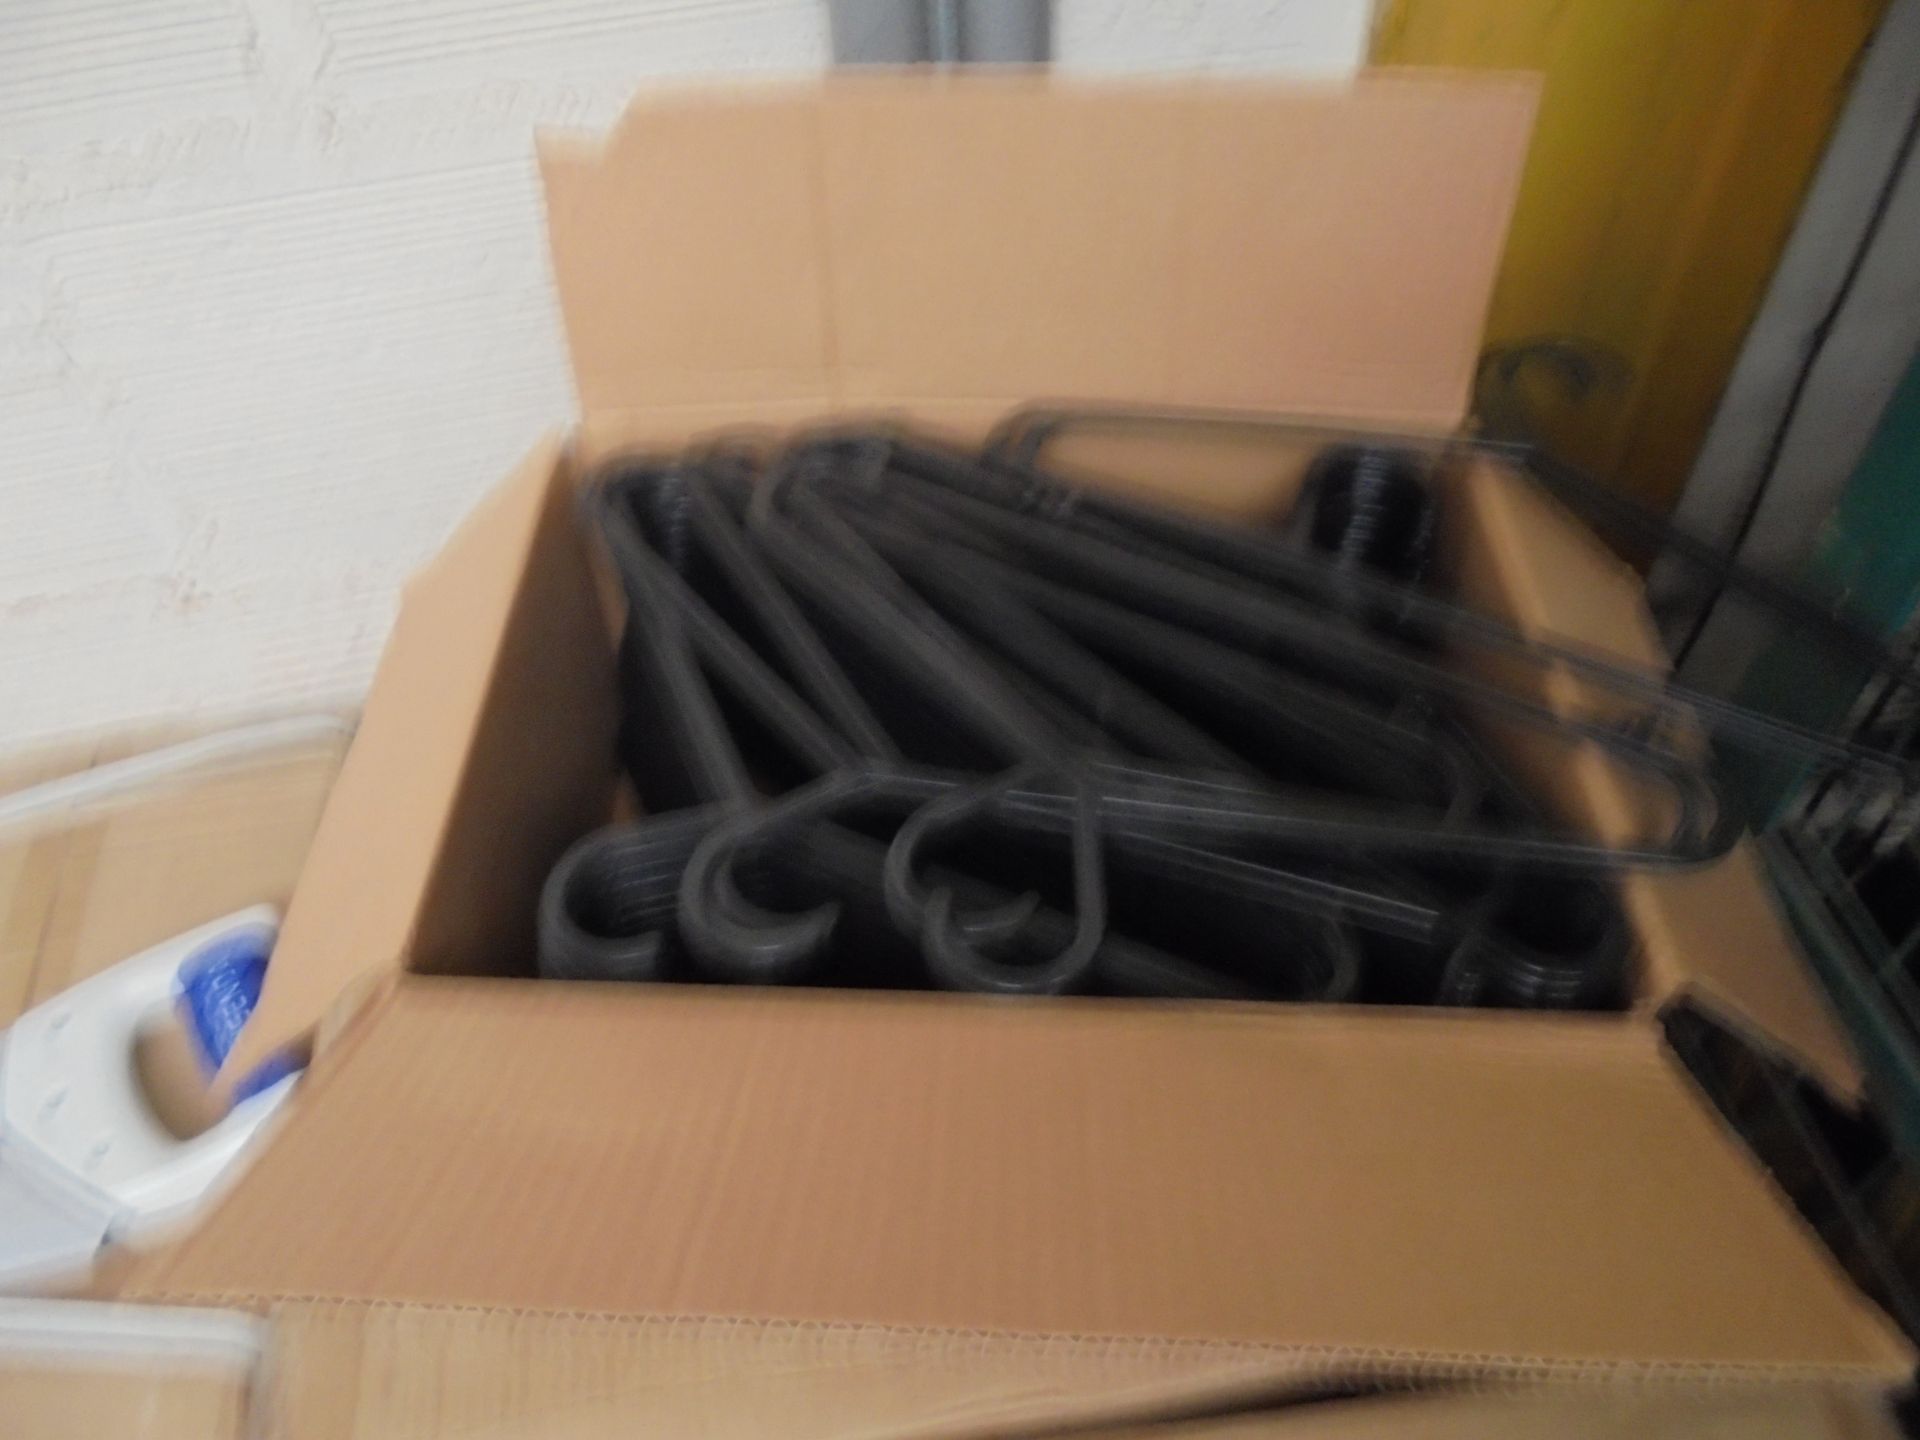 Box of 100 Black Clothes hangers, new.